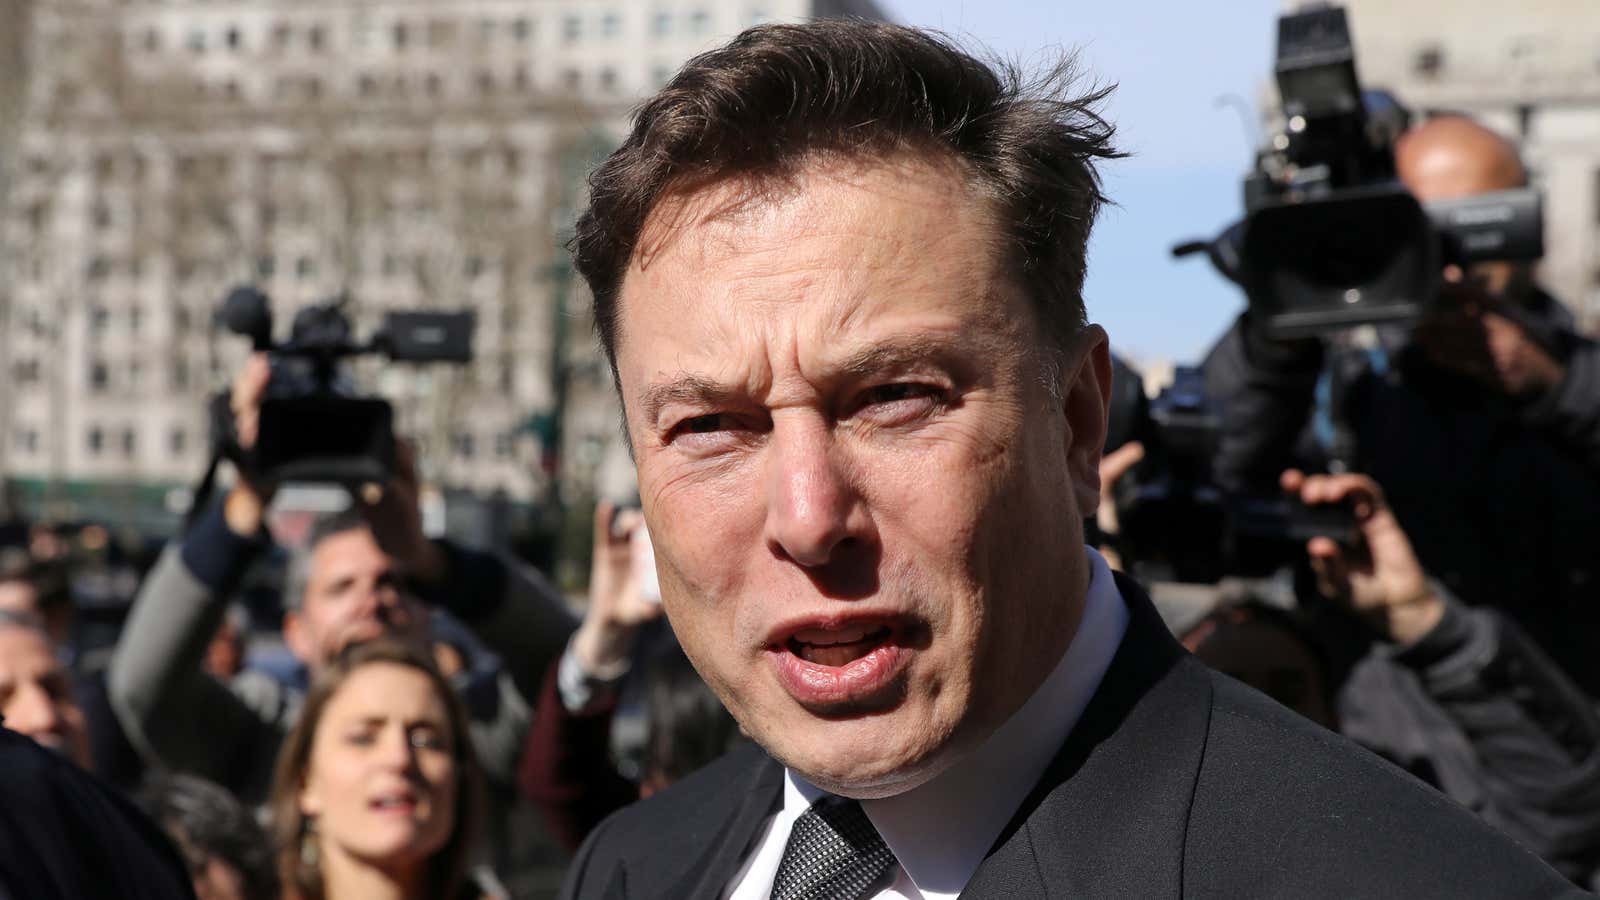 Tesla CEO Elon Musk leaves Manhattan federal court after a hearing on his fraud settlement with the Securities and Exchange Commission (SEC) in New York City, U.S. April 4, 2019.